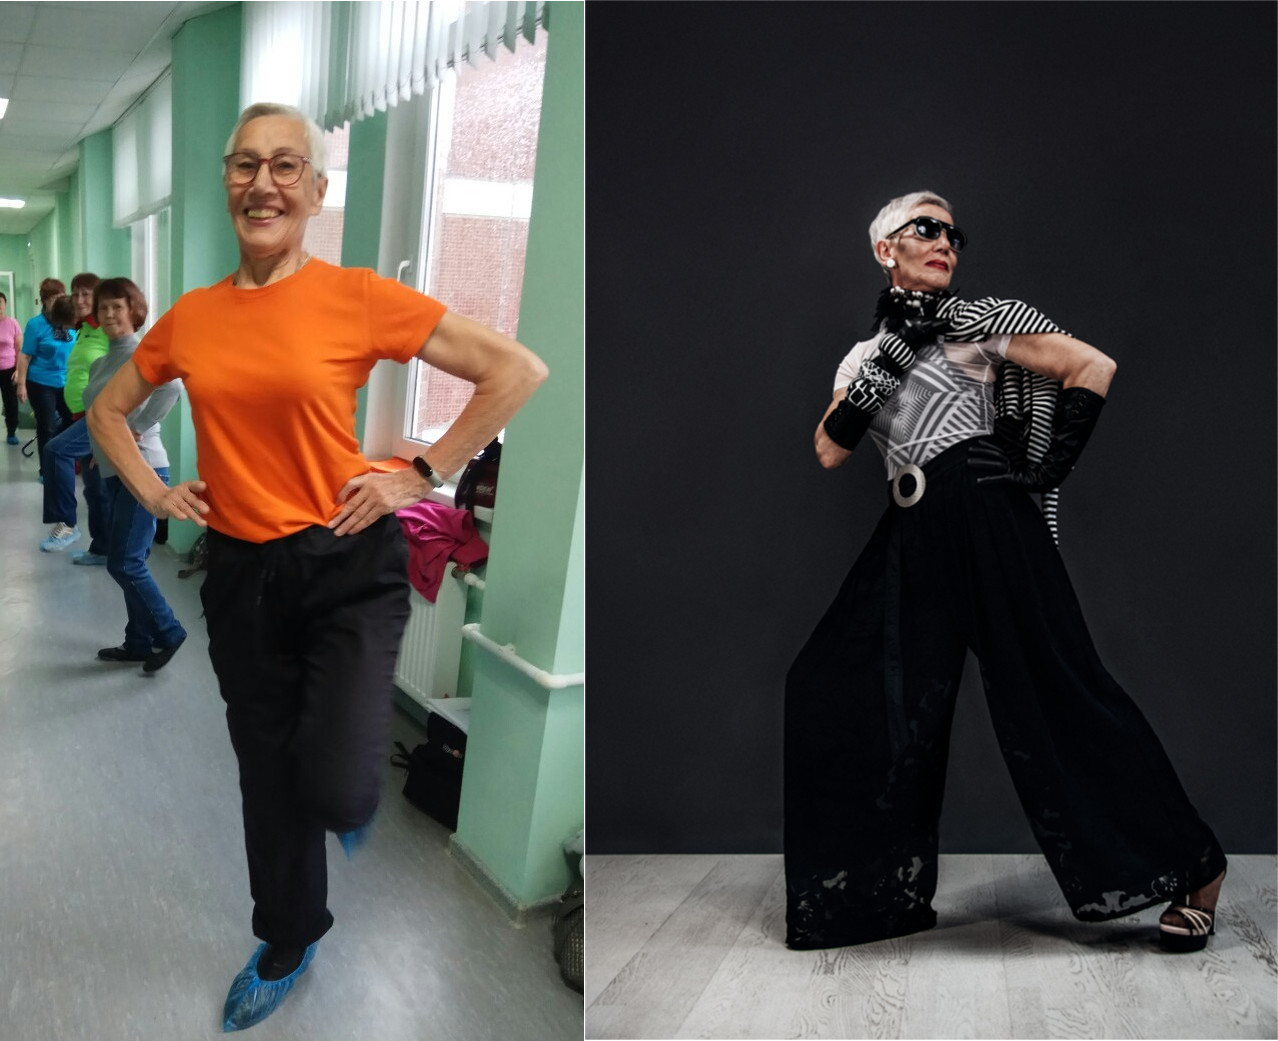 Not grandparents, but models! - My, Charity, Creative, PHOTOSESSION, Grandmother, Models, Transformation, Longpost